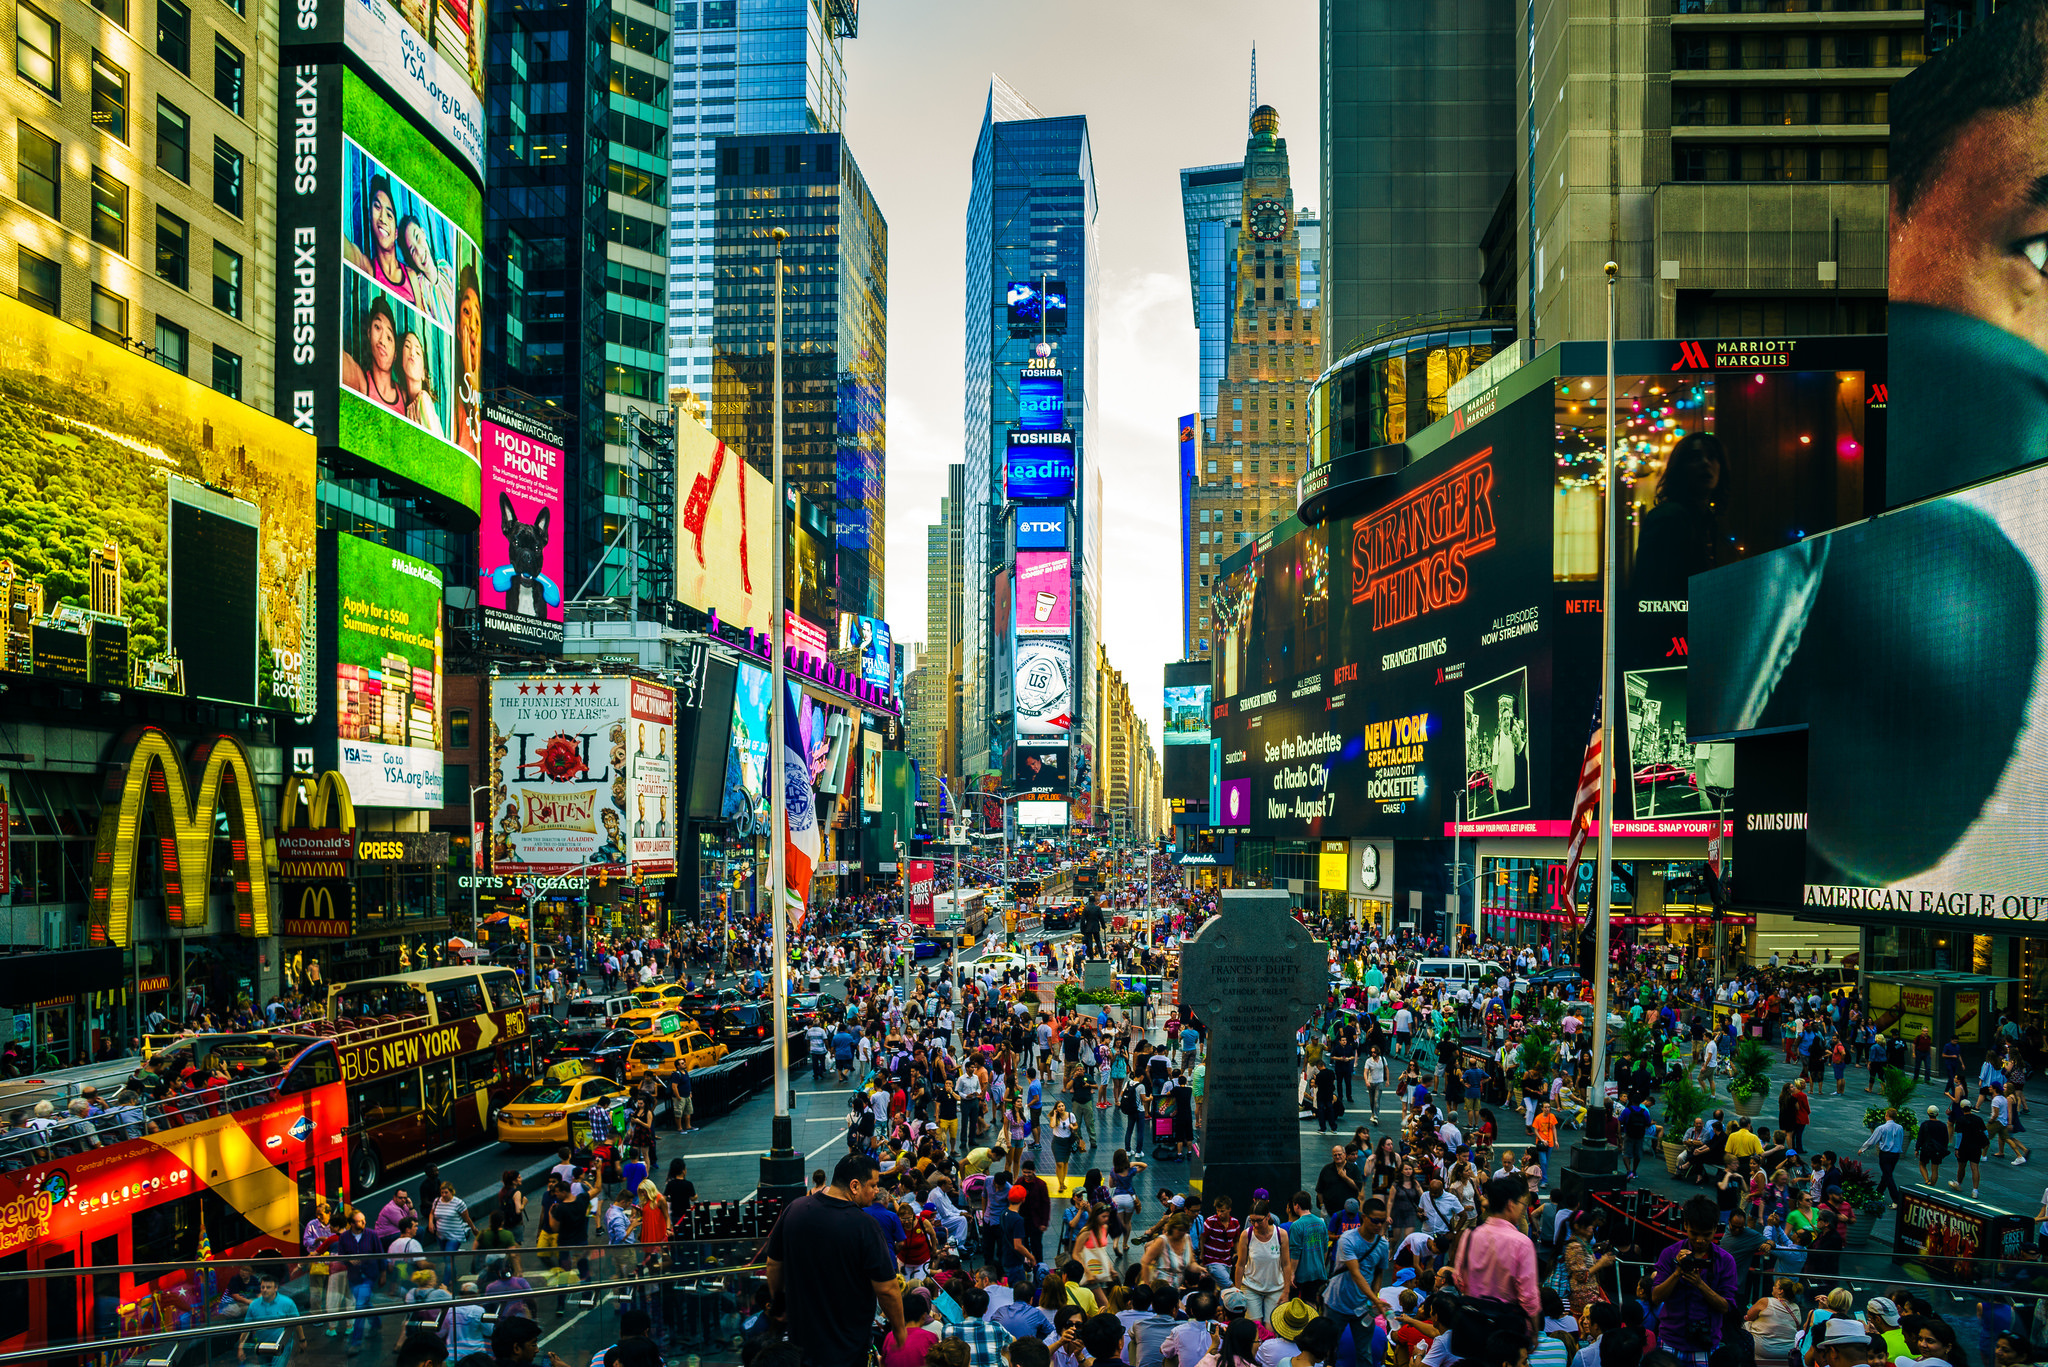 Popular Times Square Image for Phone